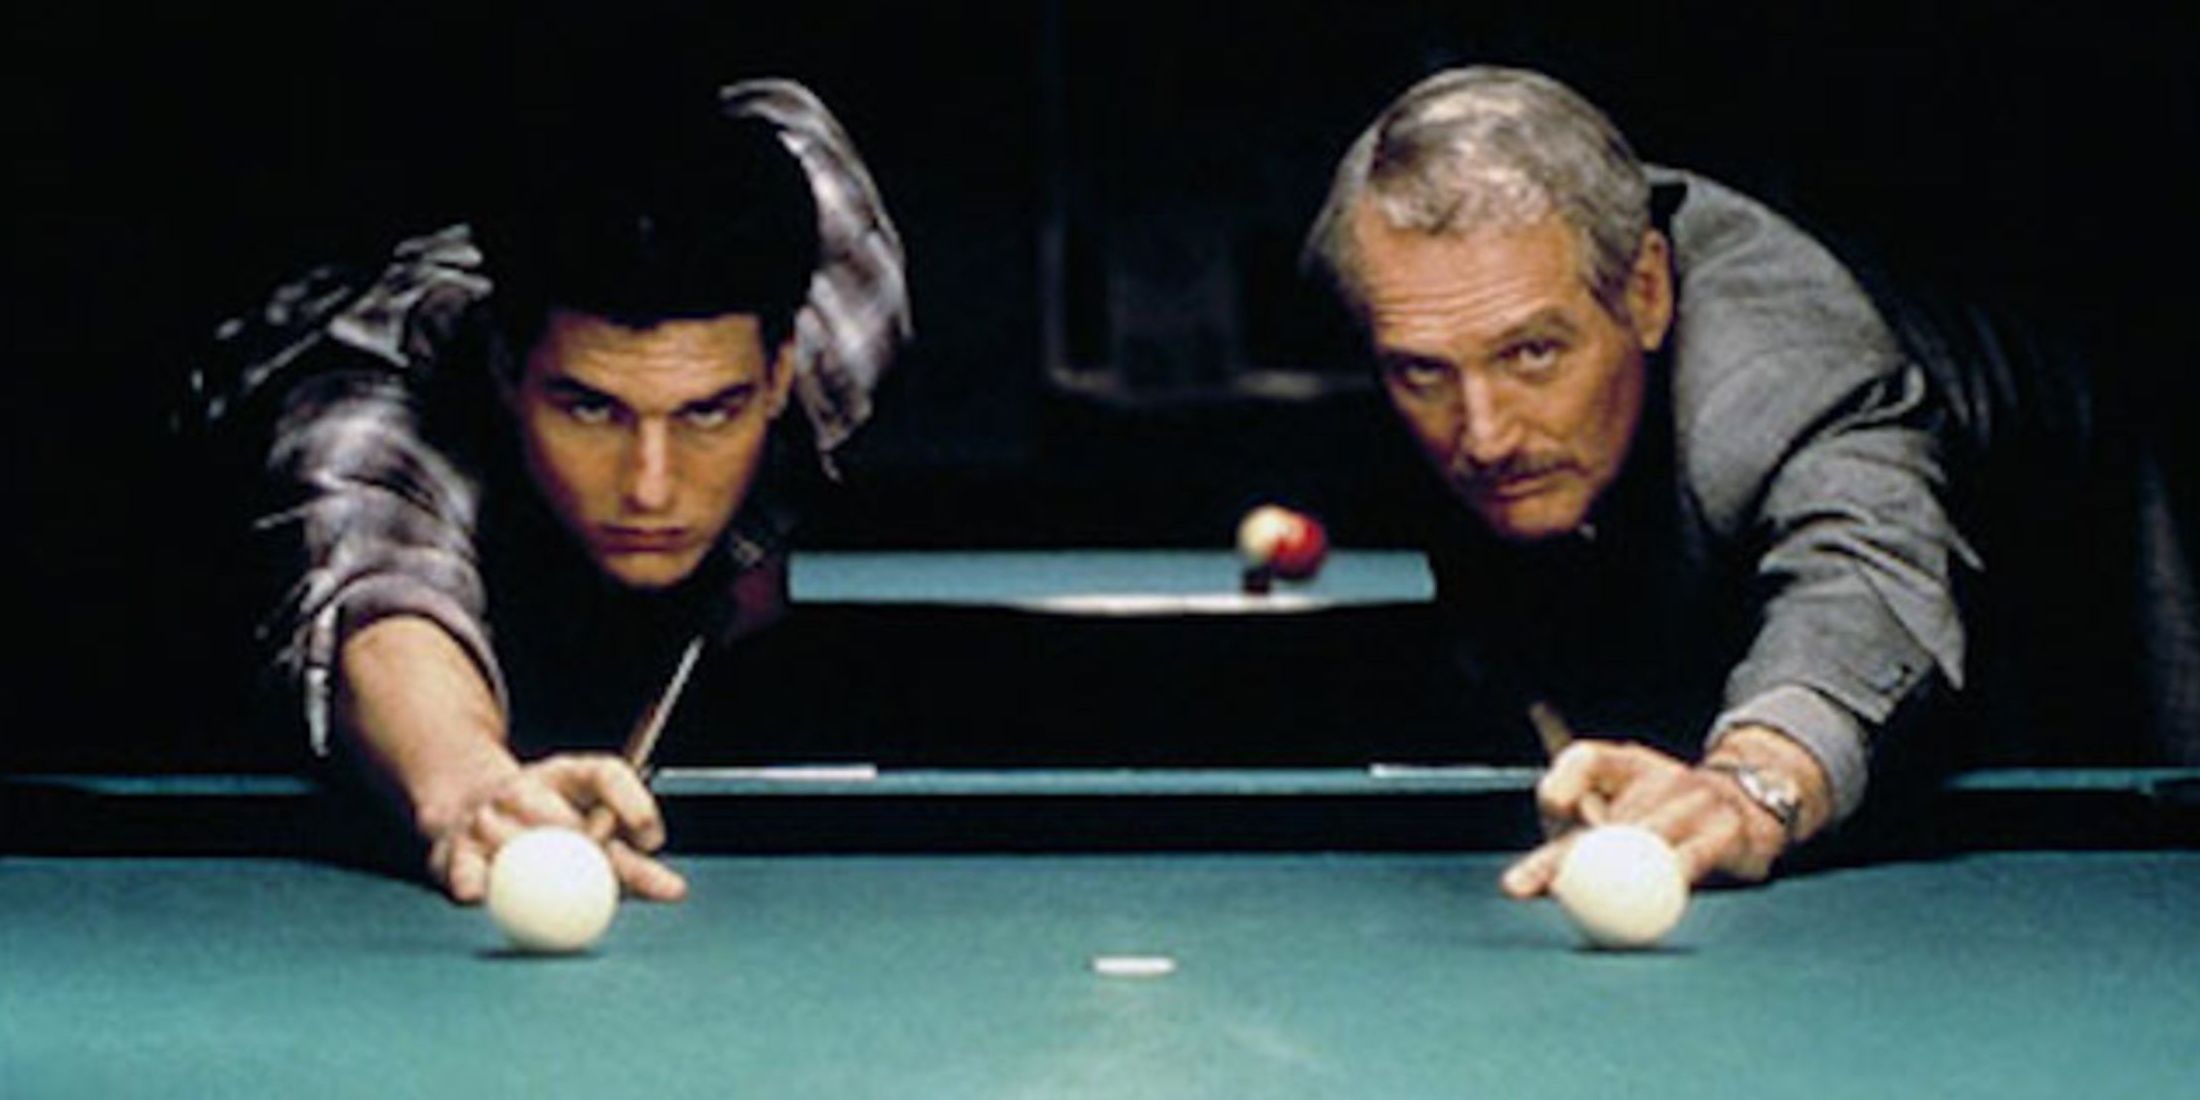 Eddie and Vincent playing snooker in The Color of Money